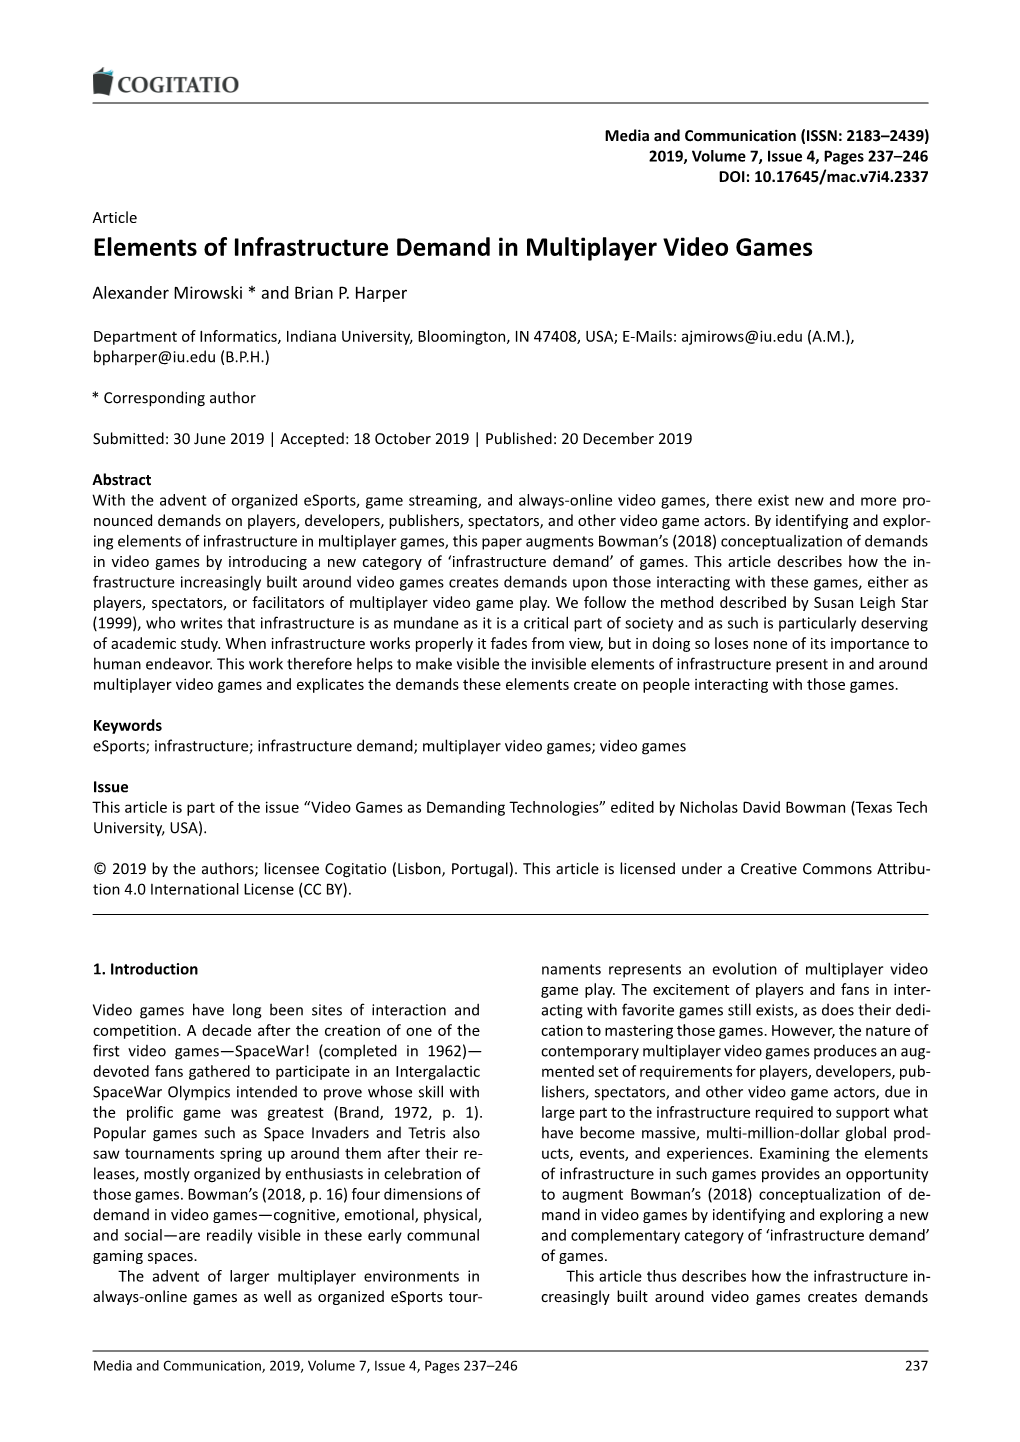 Elements of Infrastructure Demand in Multiplayer Video Games